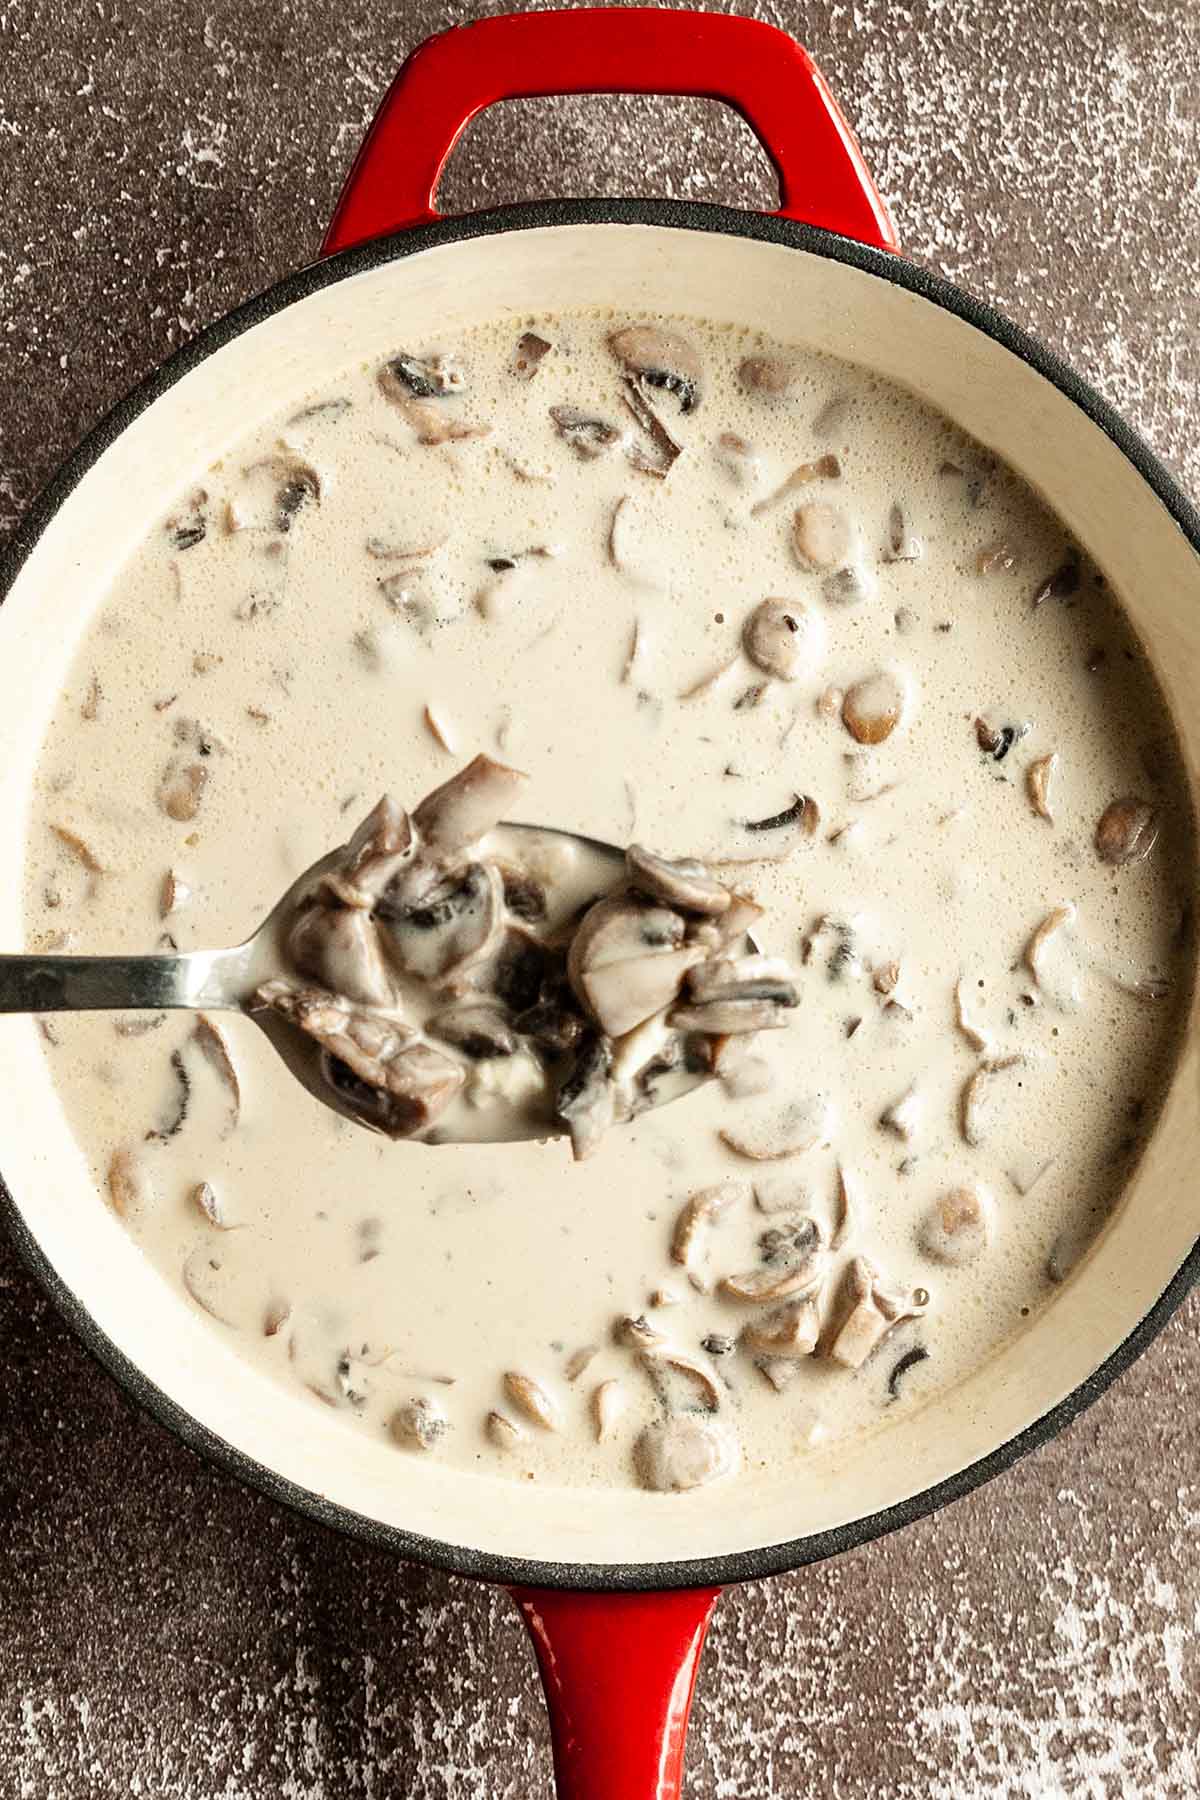 A spoonful of creamy mushroom sauce being lifted from a skillet.